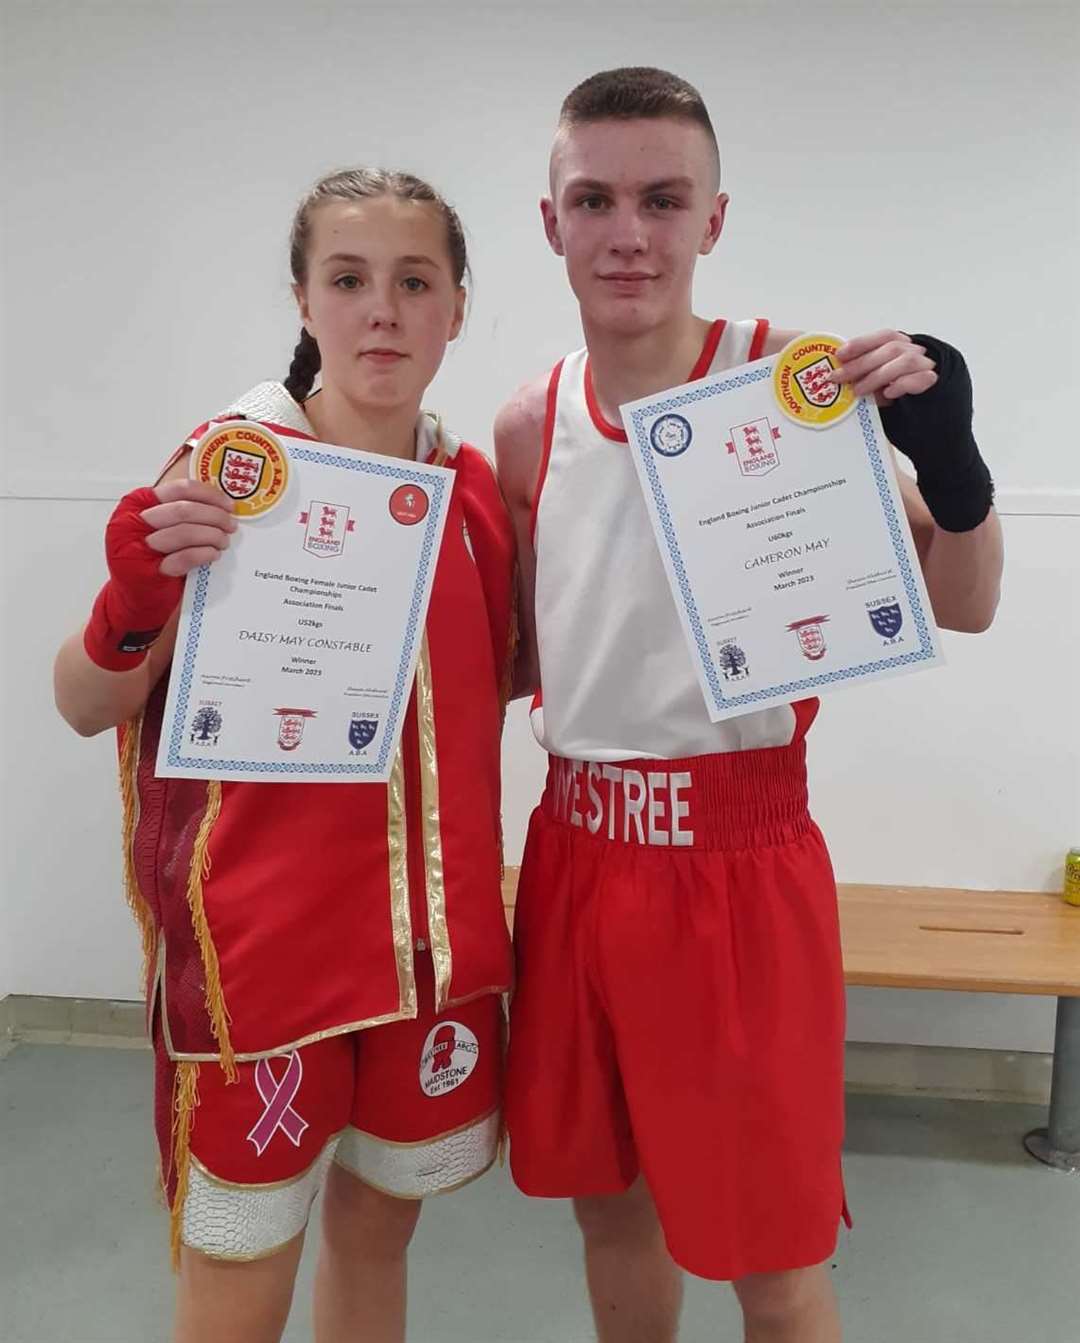 Westree boxers Daisy Constable and Cameron May.